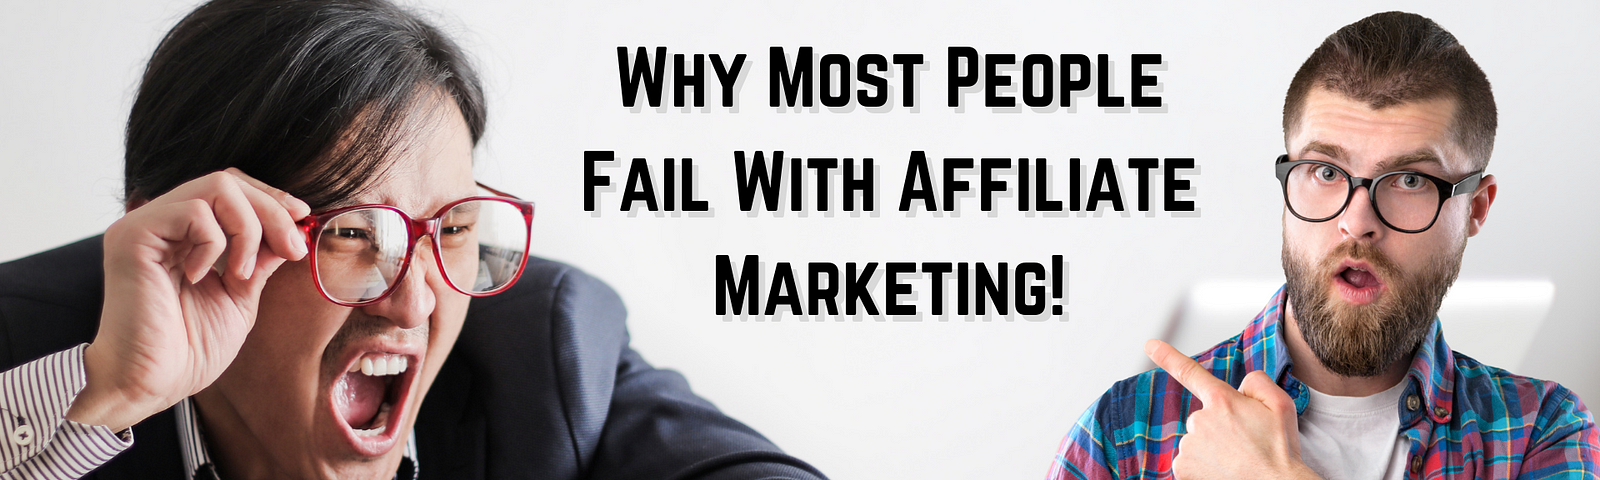 this is why most people fail with affiliate marketing